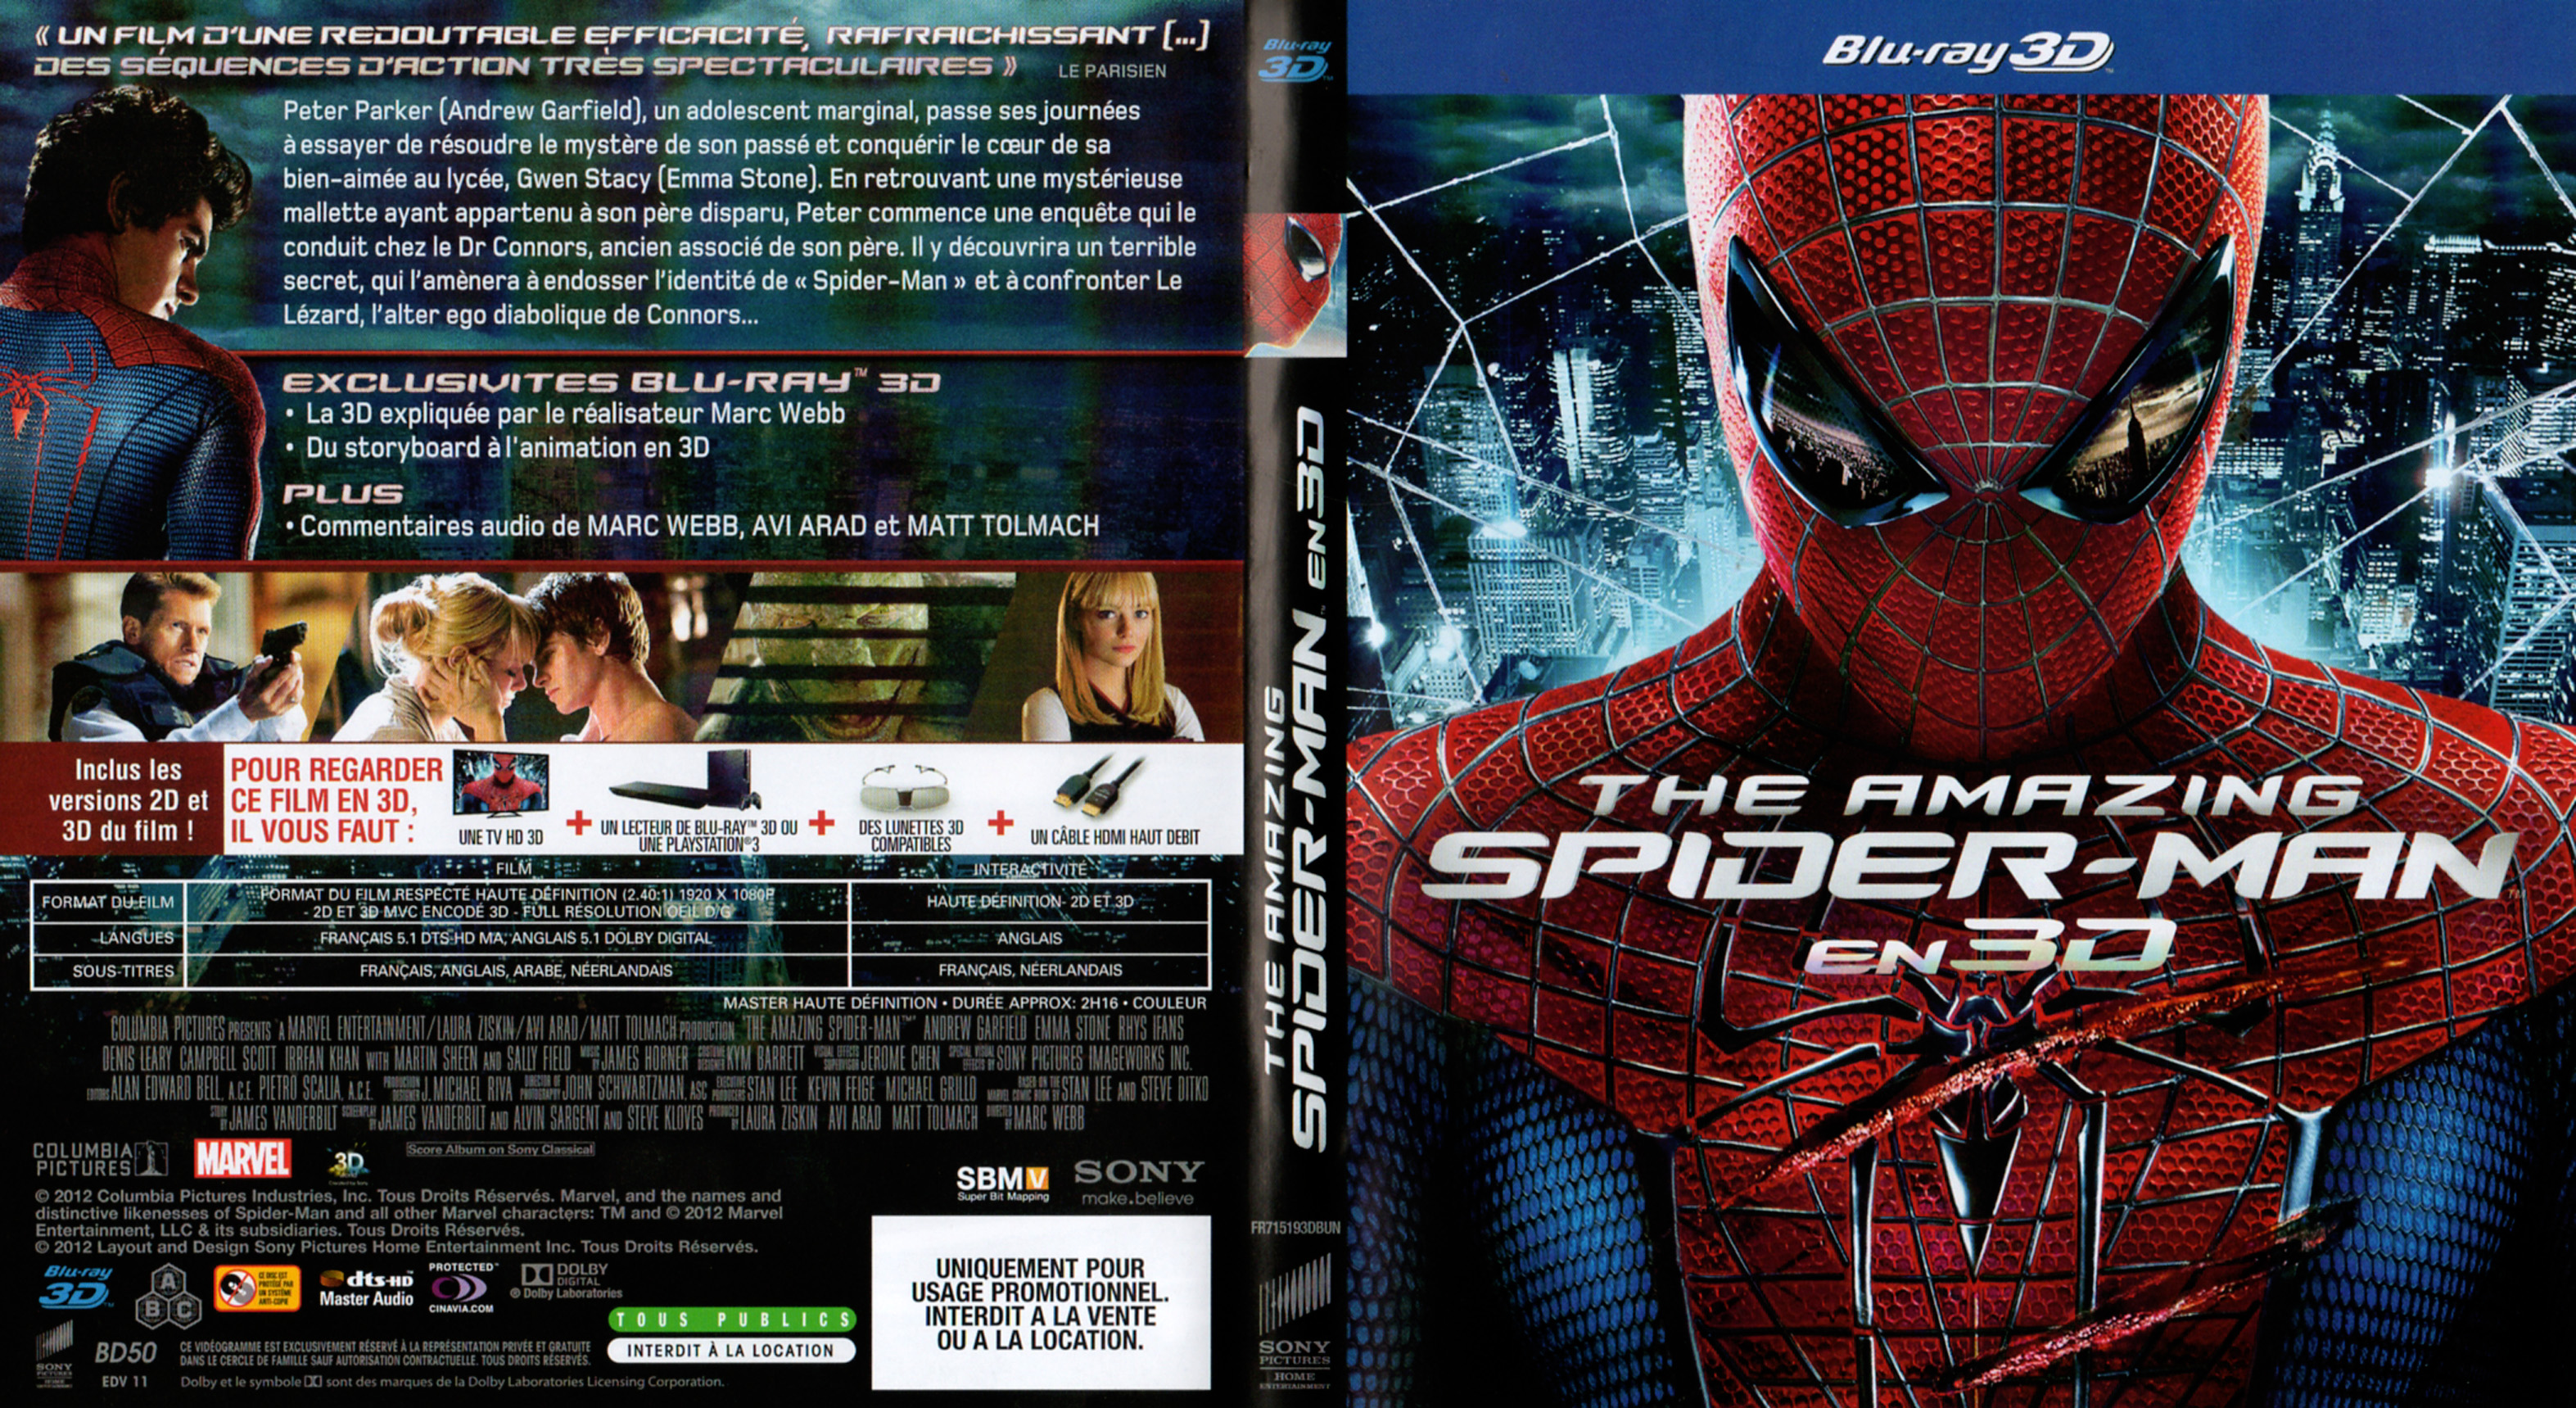 Jaquette DVD The Amazing Spider-Man 3D (BLU-RAY) v2